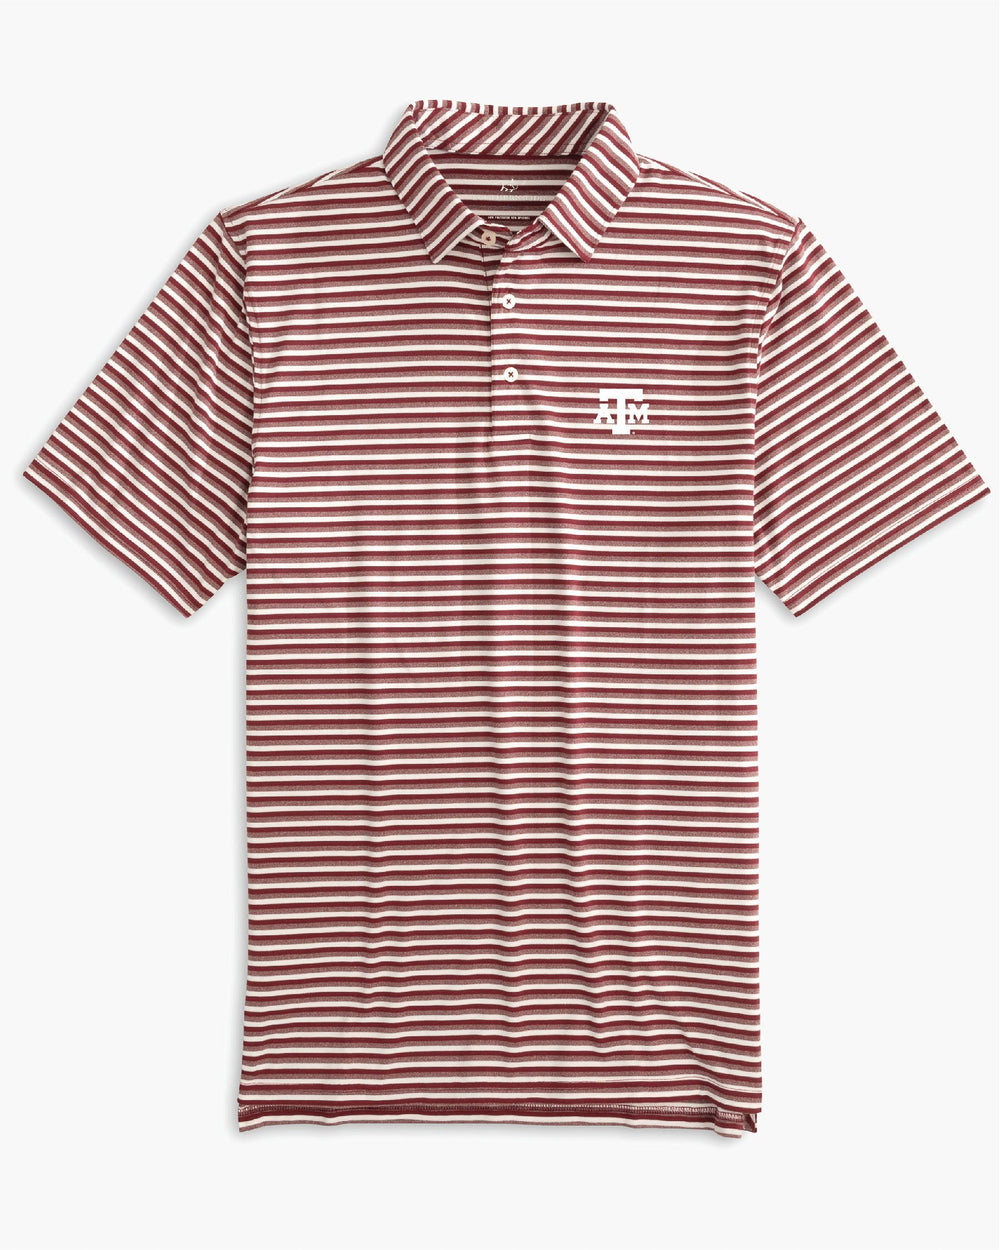 The front of the Men's Texas A&M Aggies Heathered Striped Performance Polo Shirt - Chianti